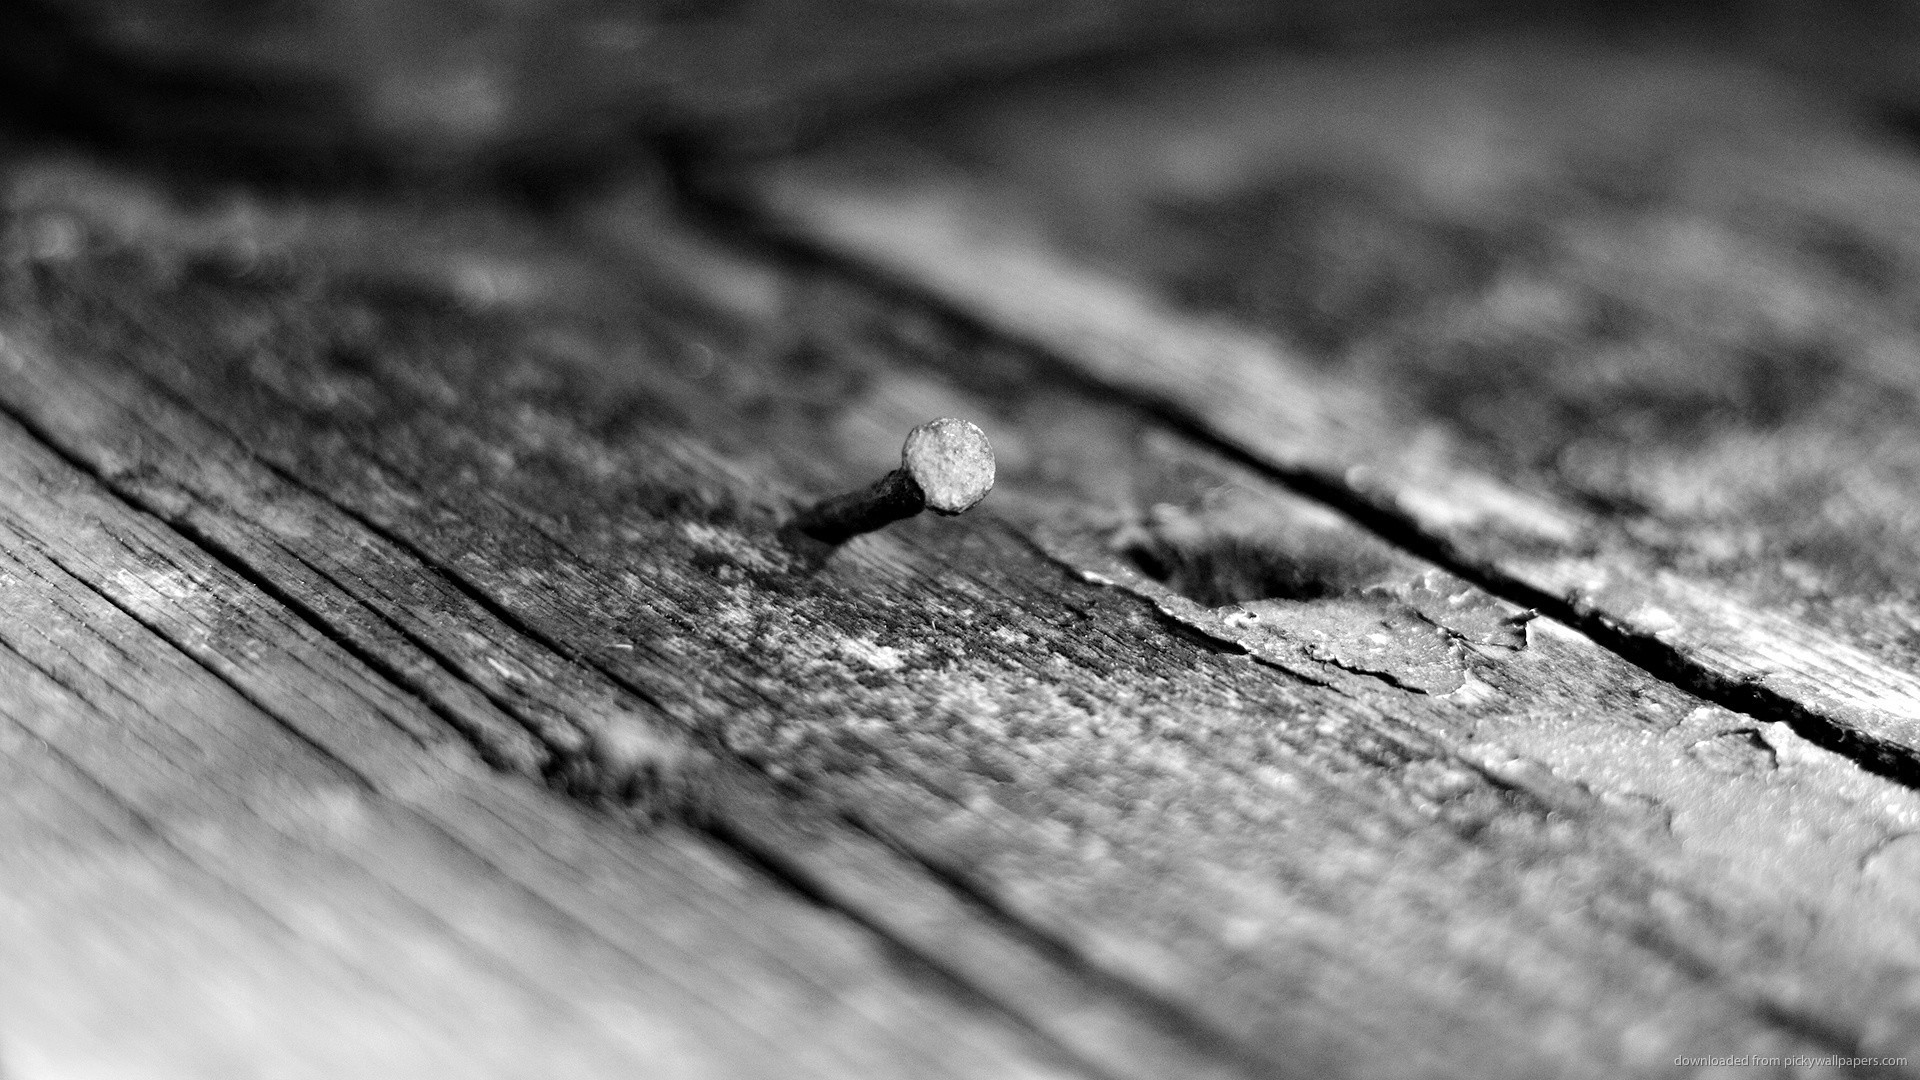 1920x1080 Old nail in wood picture